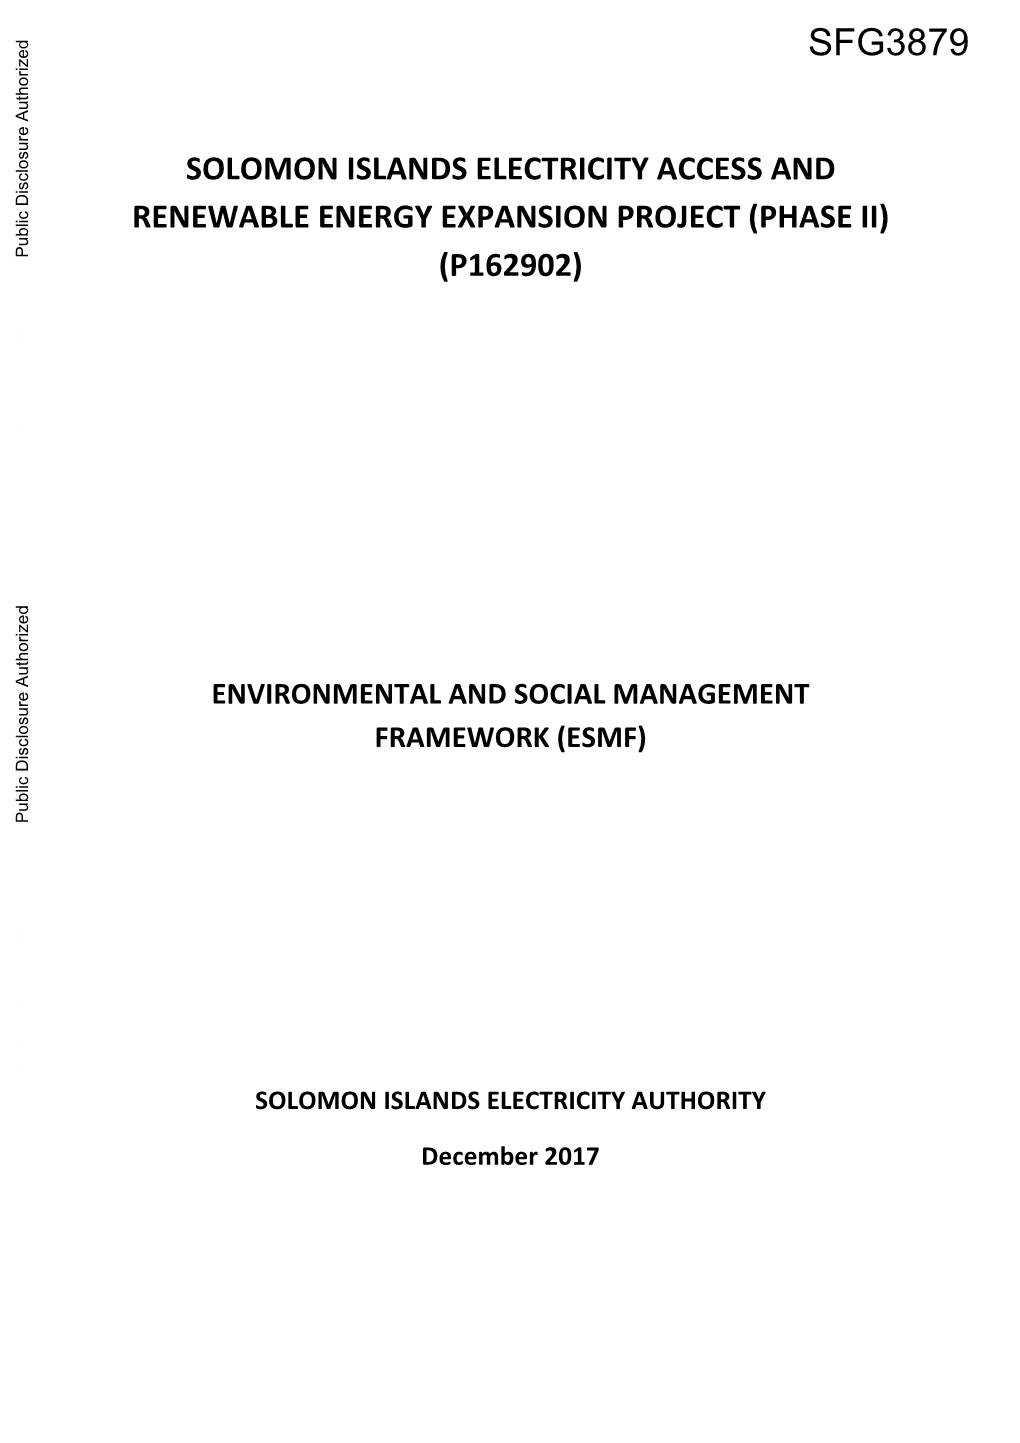 SOLOMON ISLANDS ELECTRICITY ACCESS and RENEWABLE ENERGY EXPANSION PROJECT (PHASE II) Public Disclosure Authorized (P162902) Public Disclosure Authorized